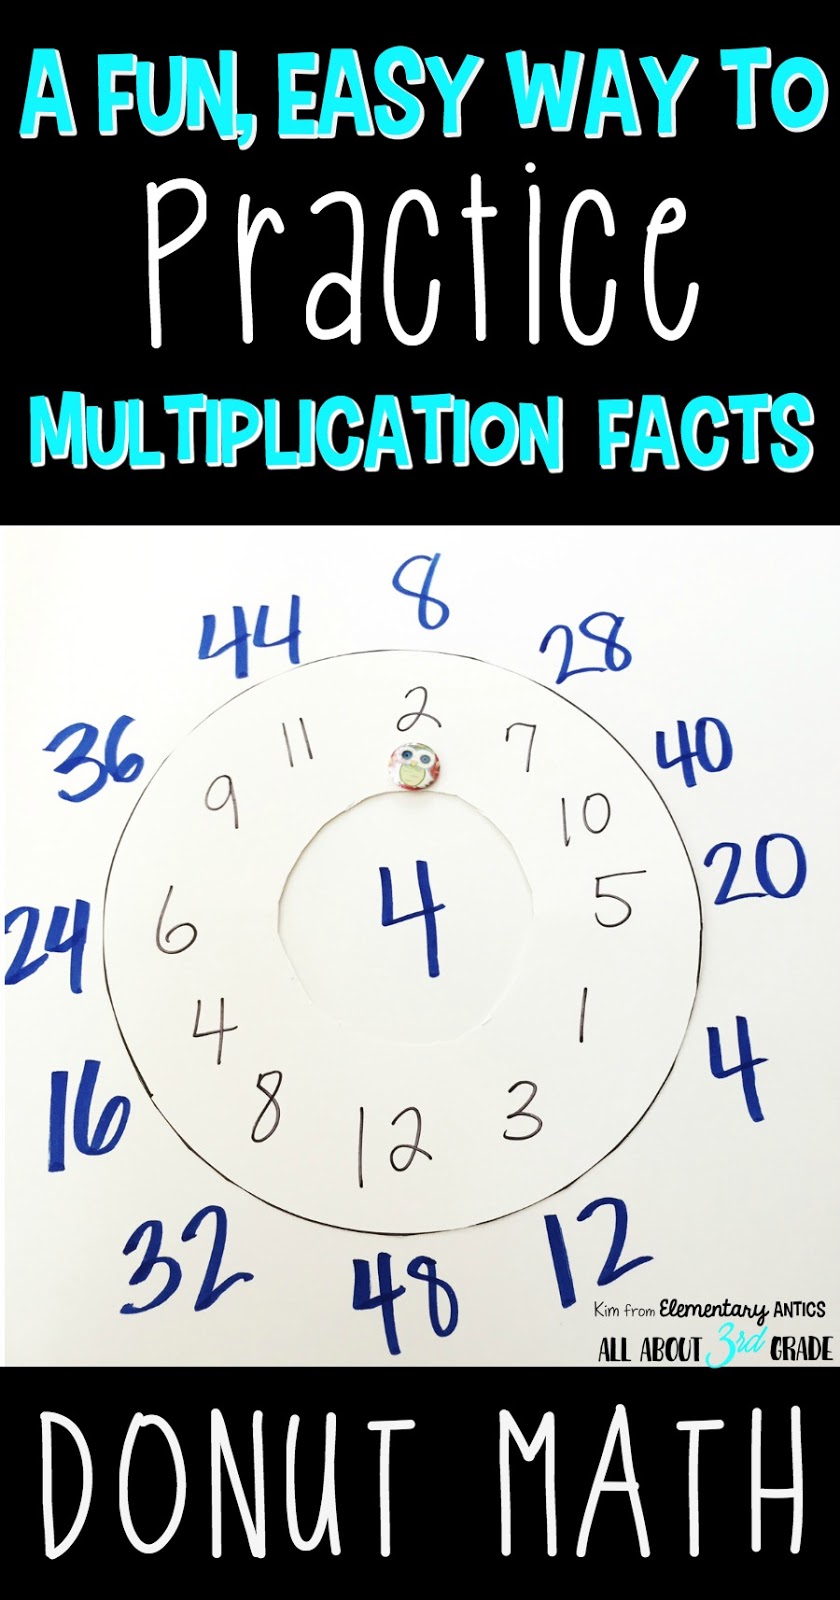 donut-math-a-fun-way-to-practice-multiplication-facts-all-about-3rd-grade